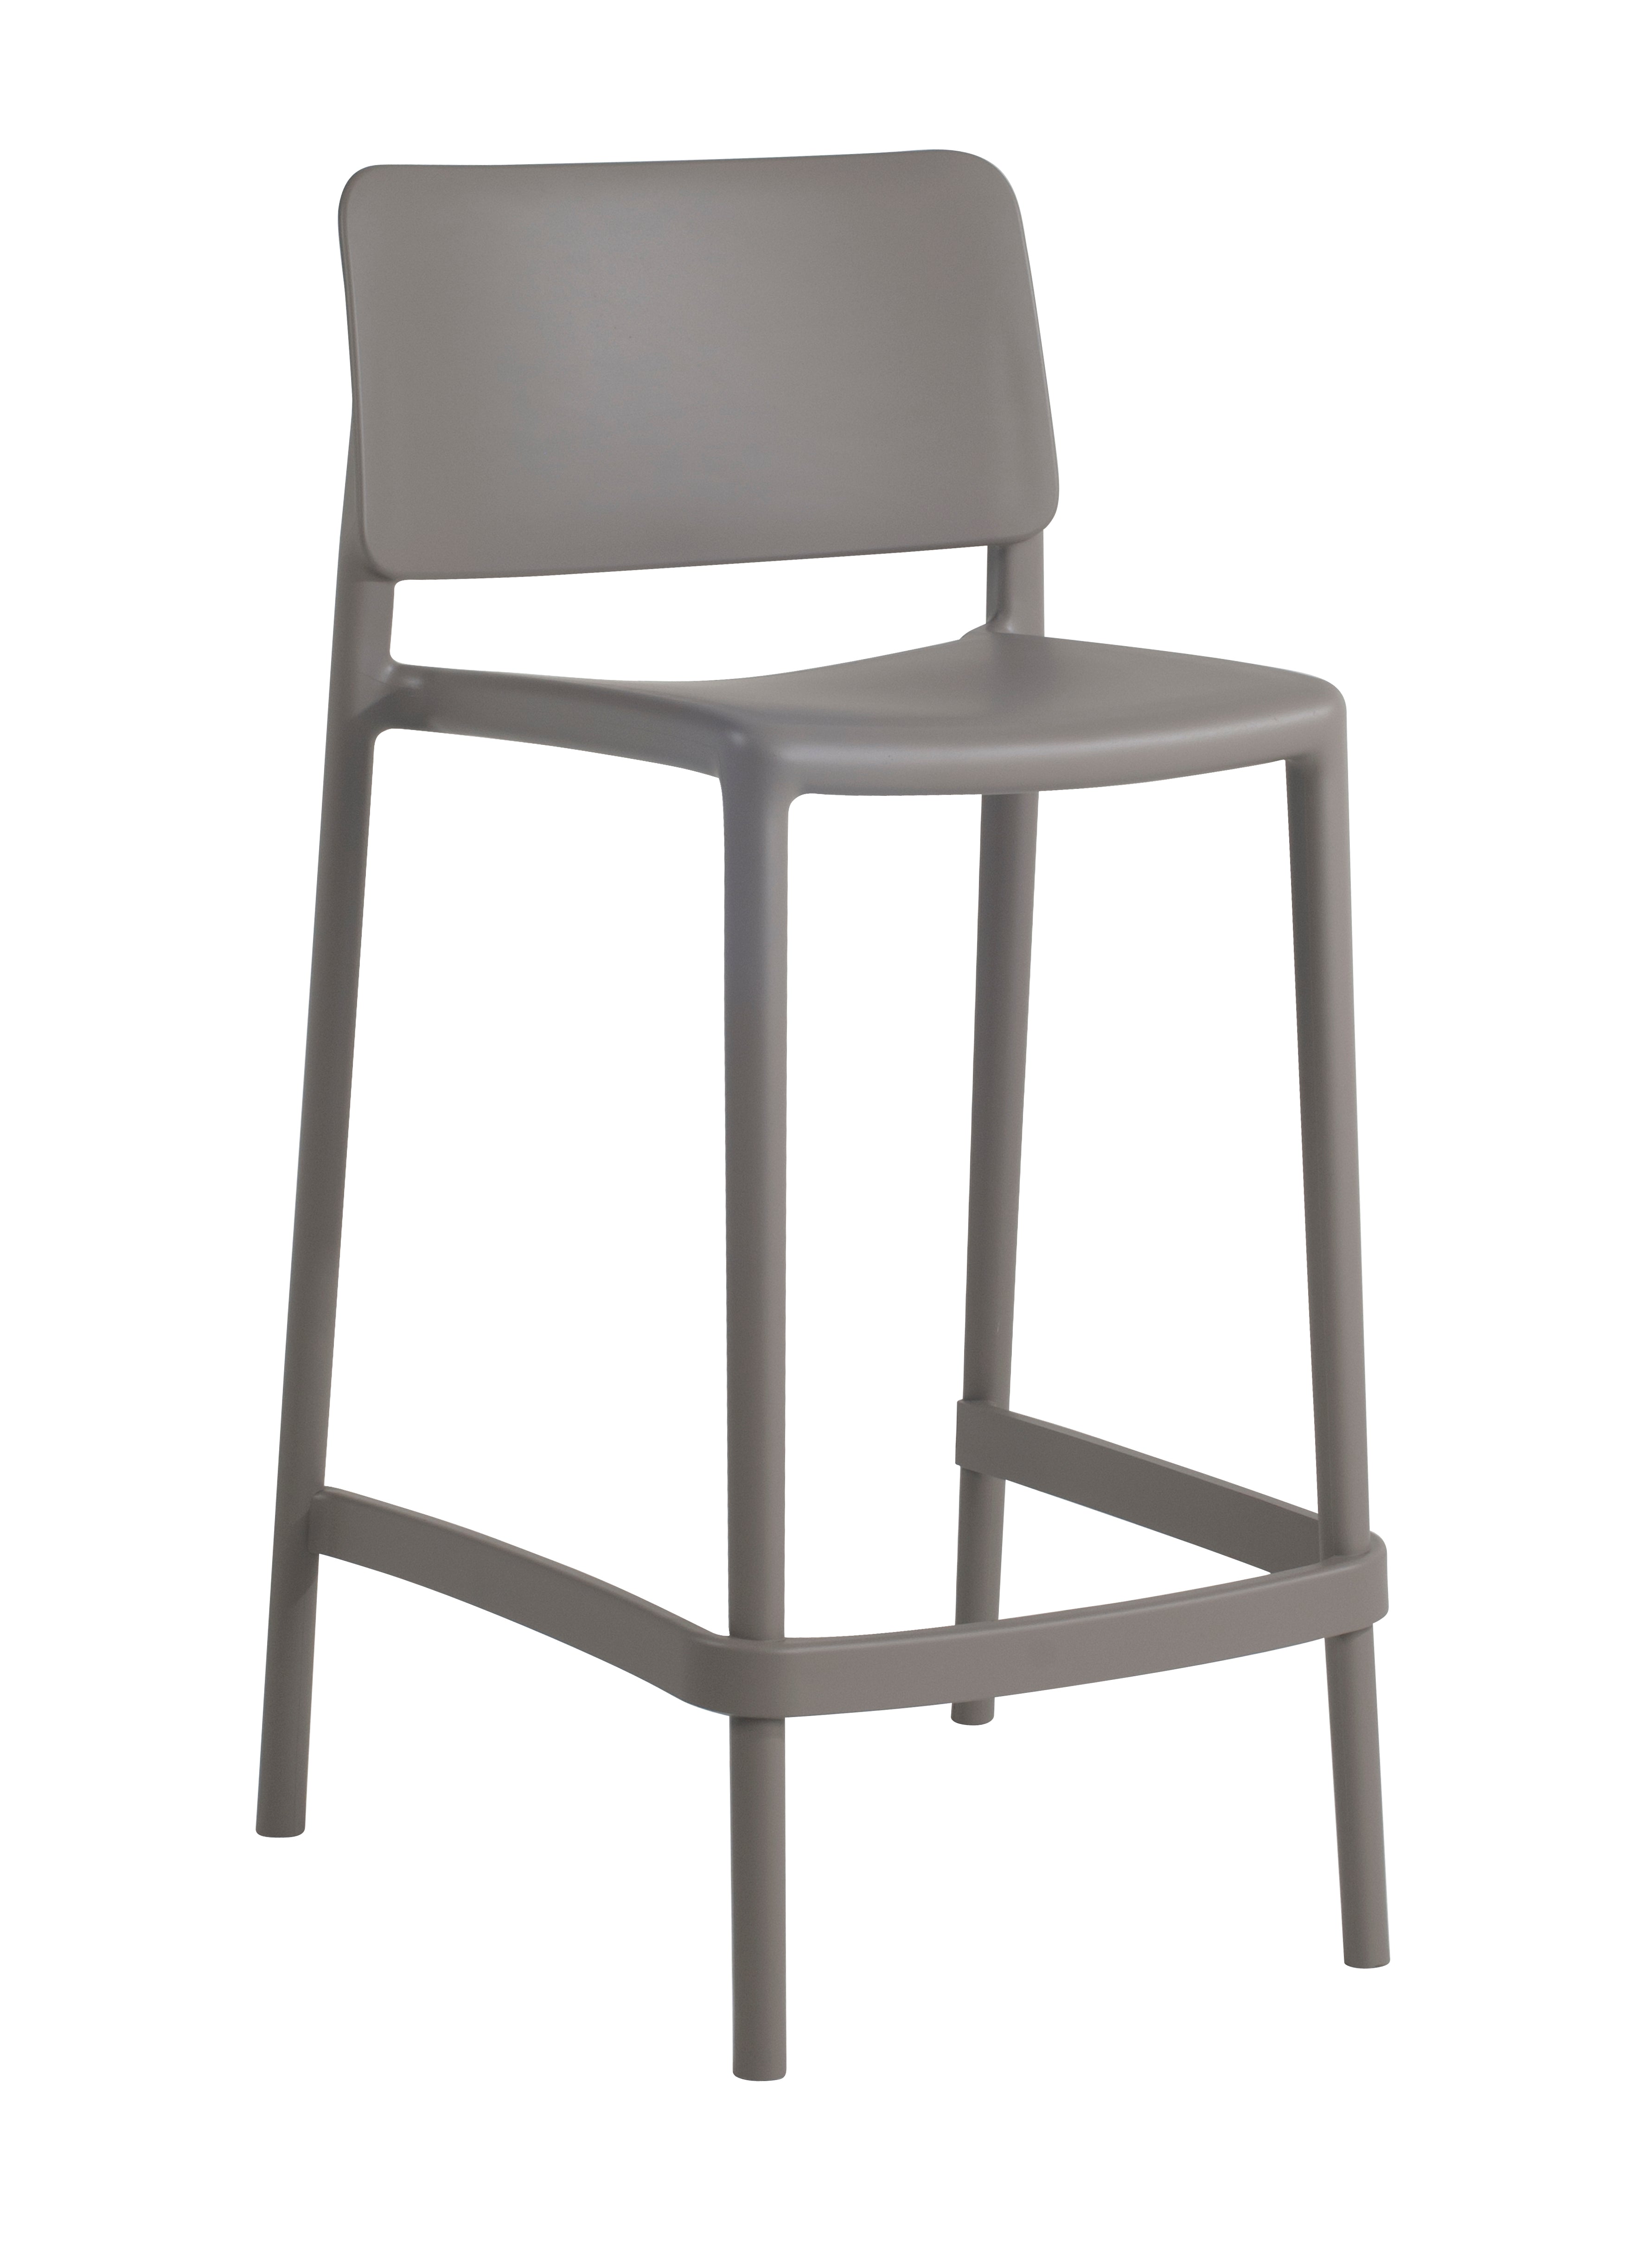 Cleo Plastic Stackable Counter Height Bar Stool in Taupe - (Set of 2)